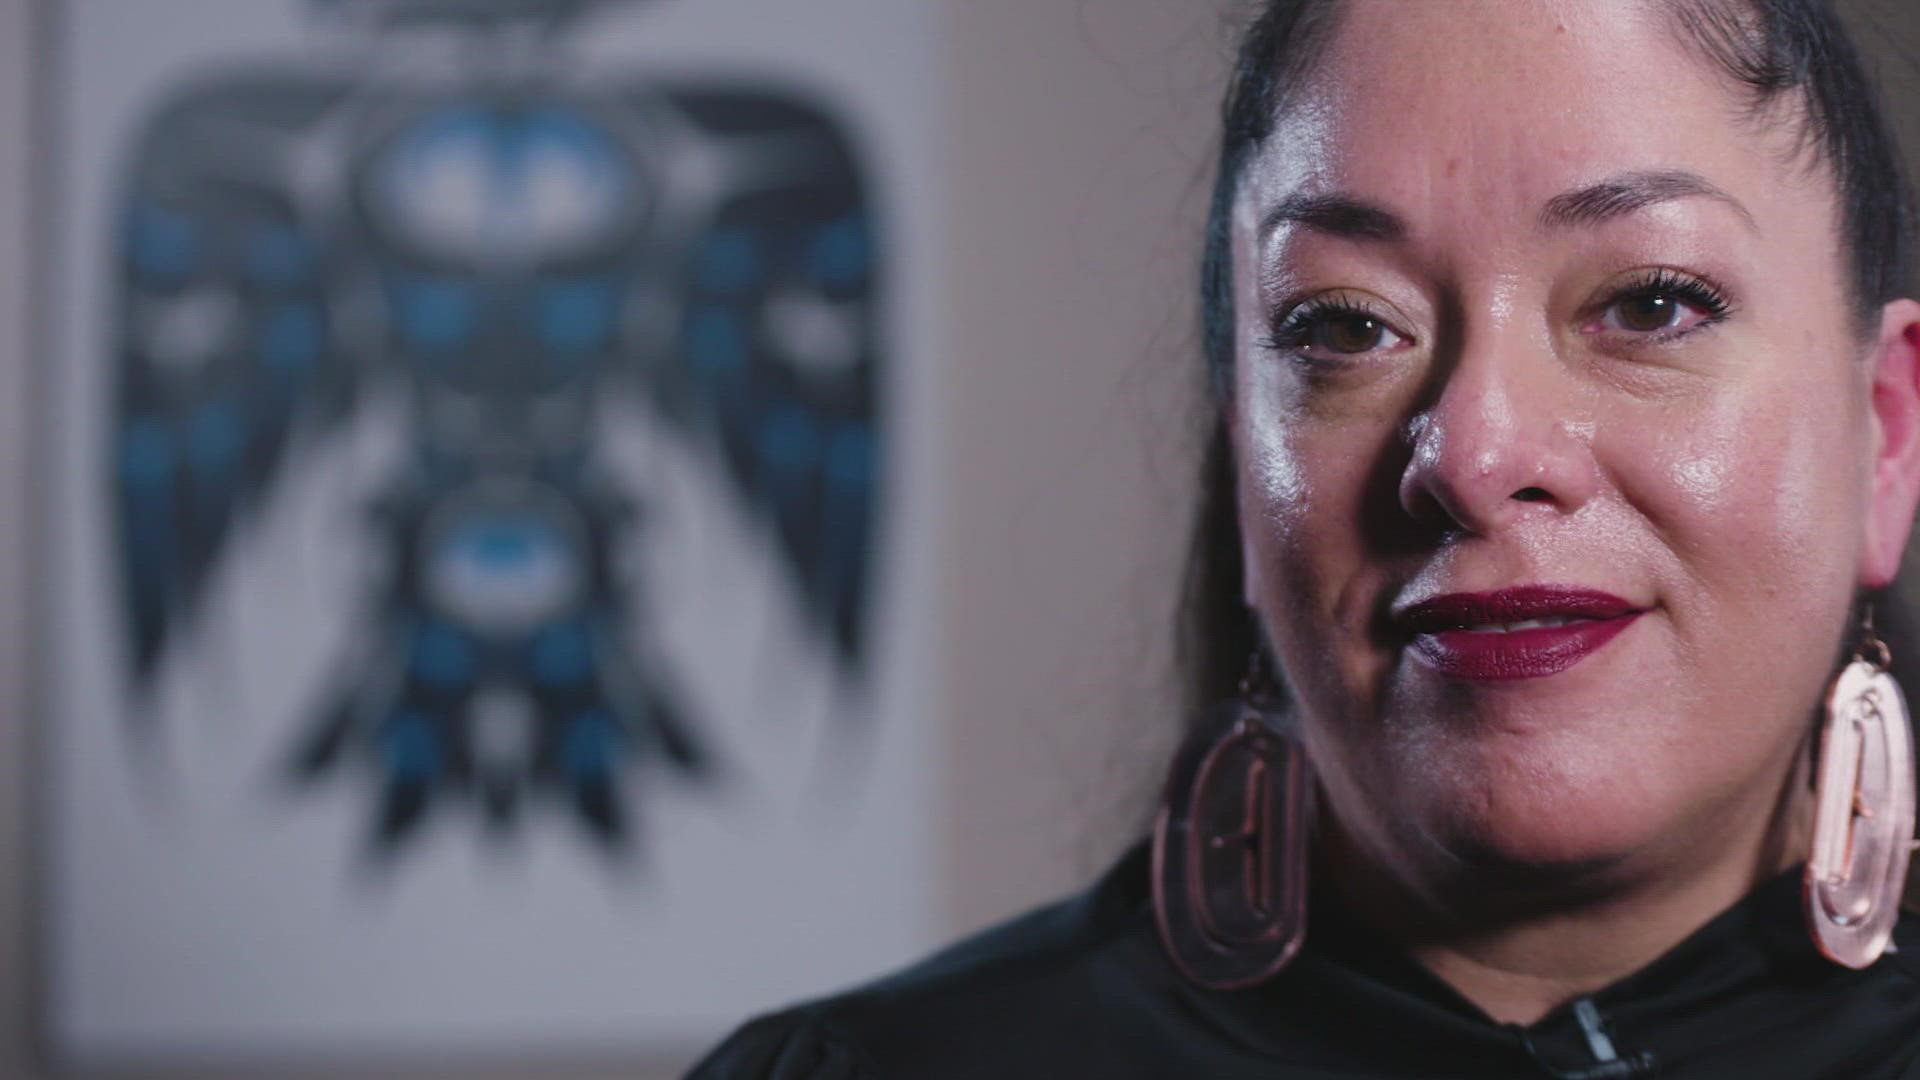 Abigail Echo-Hawk fights to erase cultural disparities king5 picture